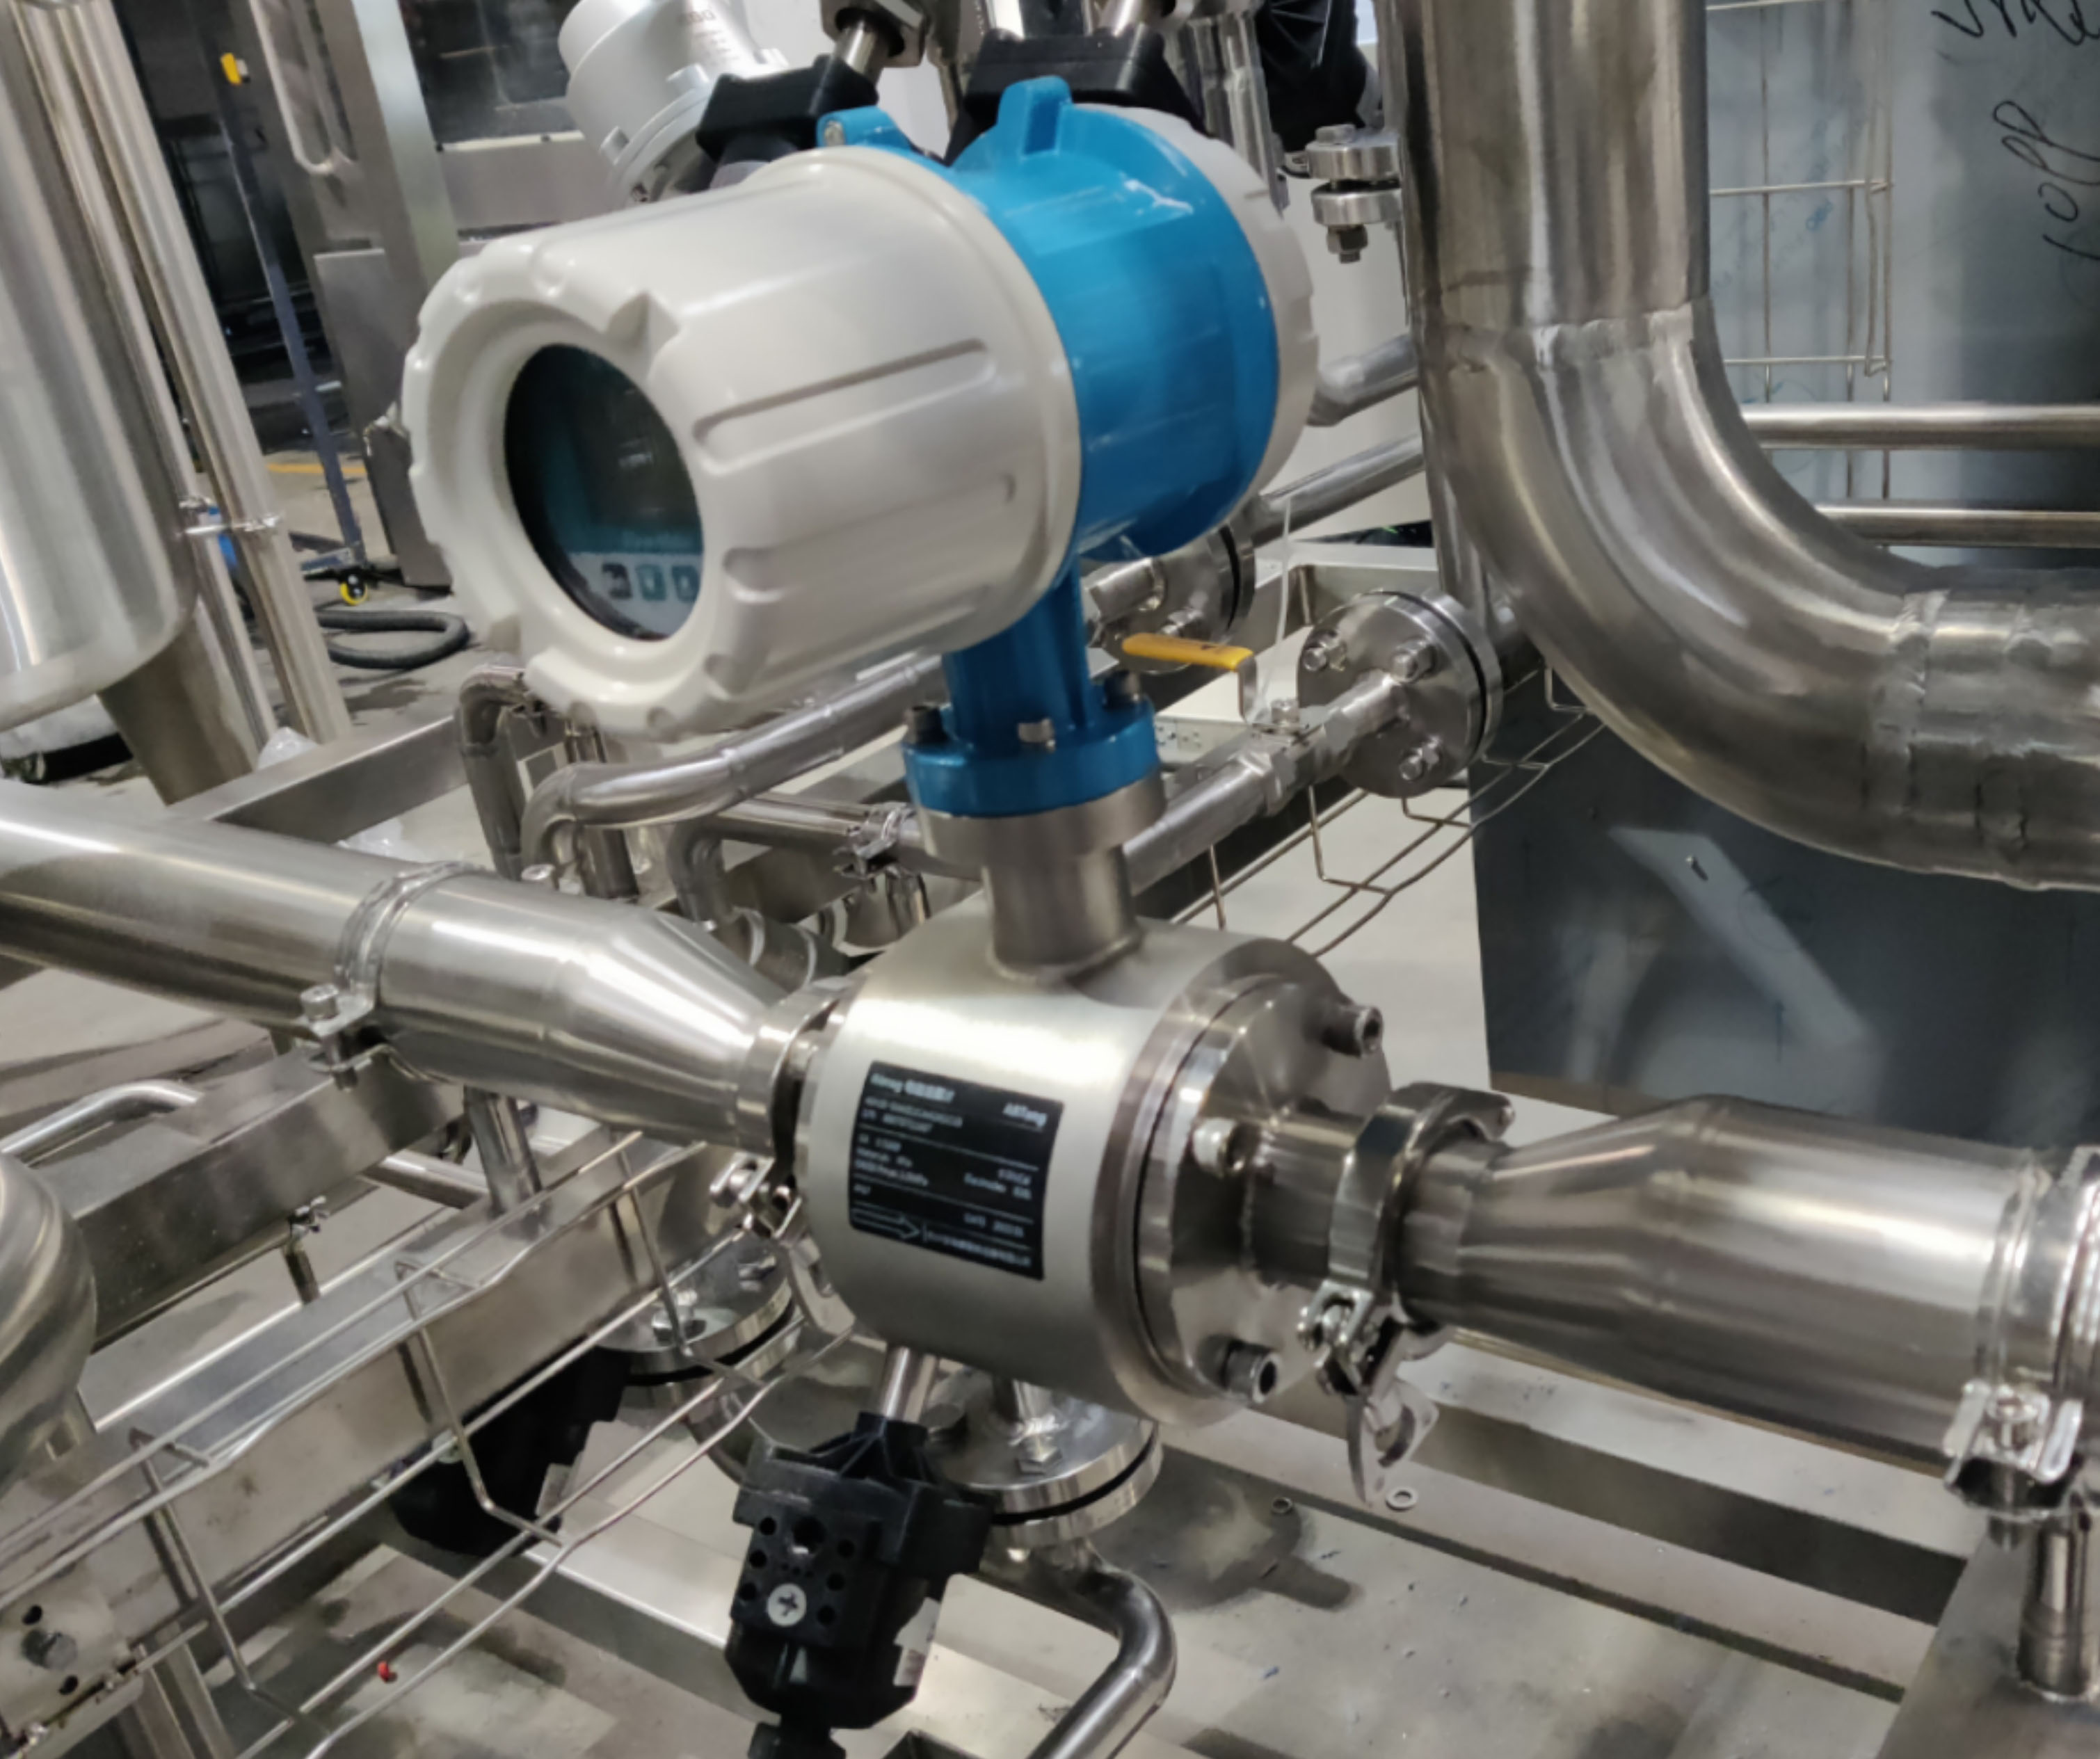 What exactly does a sanitary electromagnetic flowmeter look like?